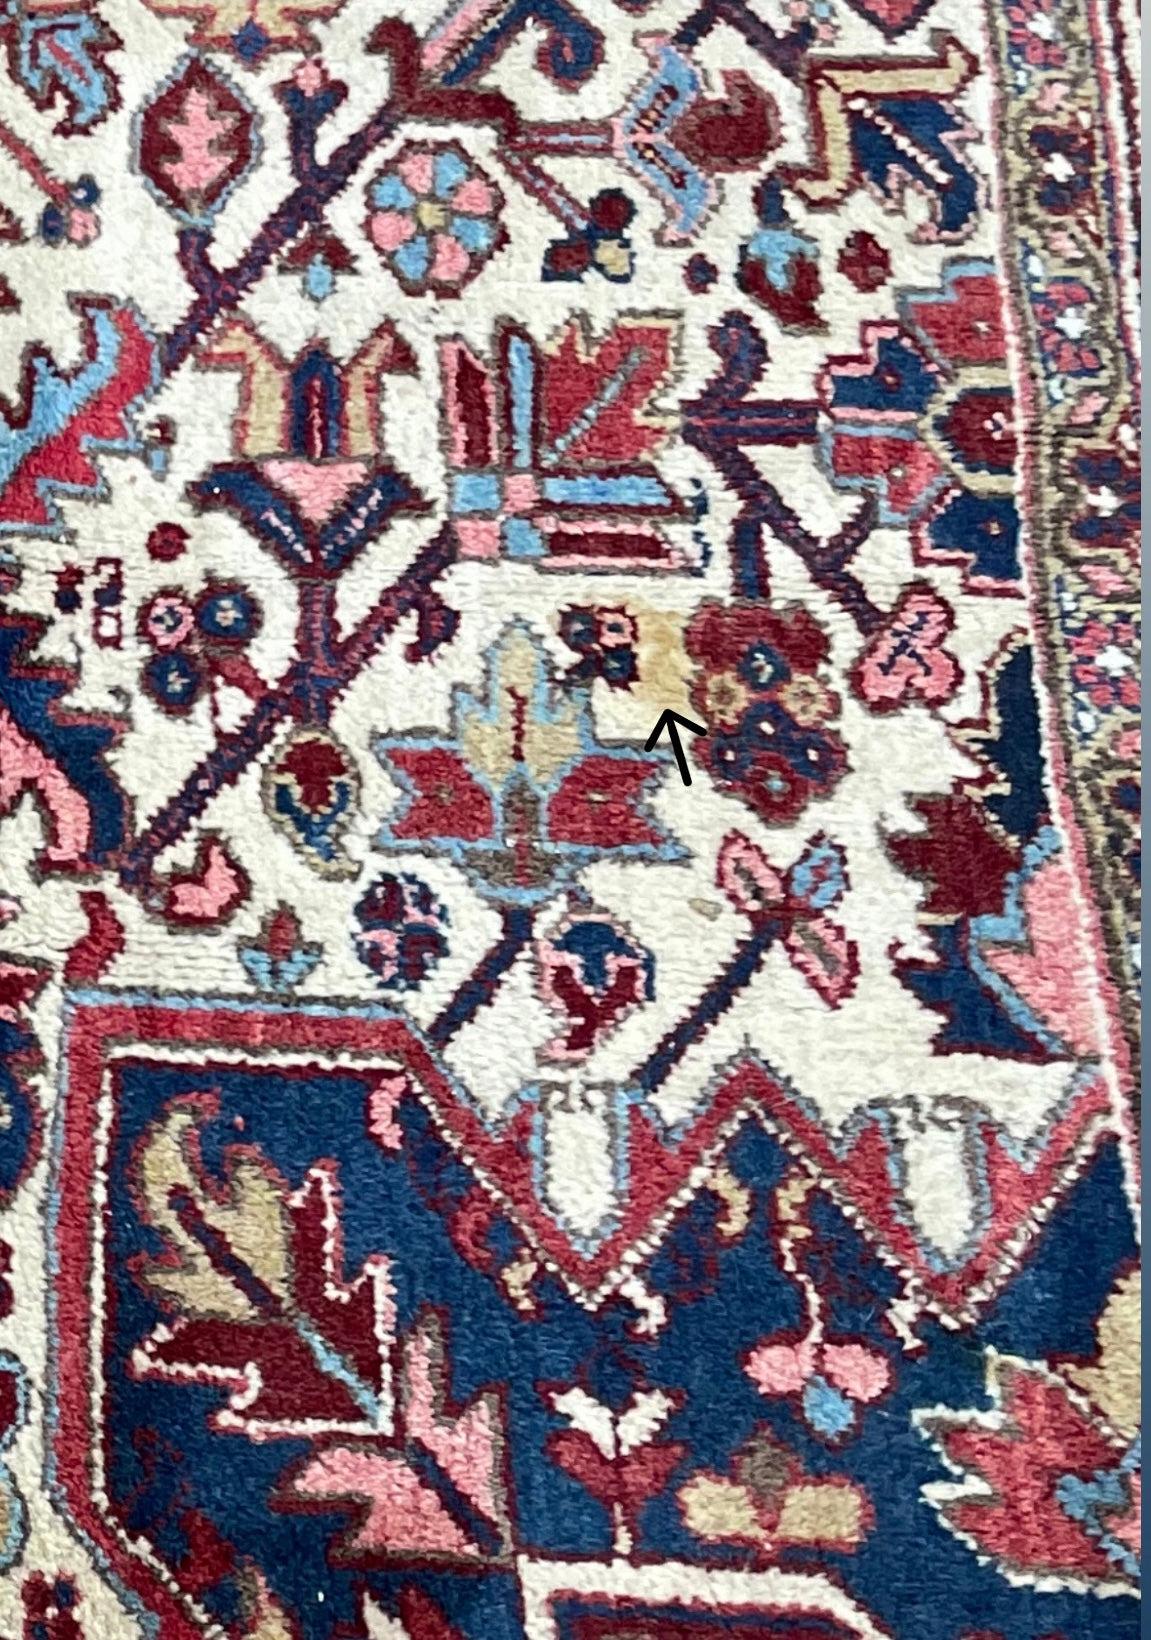 Two-toned Palace Size Vintage Northwest Tribal Heriz Rug, c.1950's For Sale 7